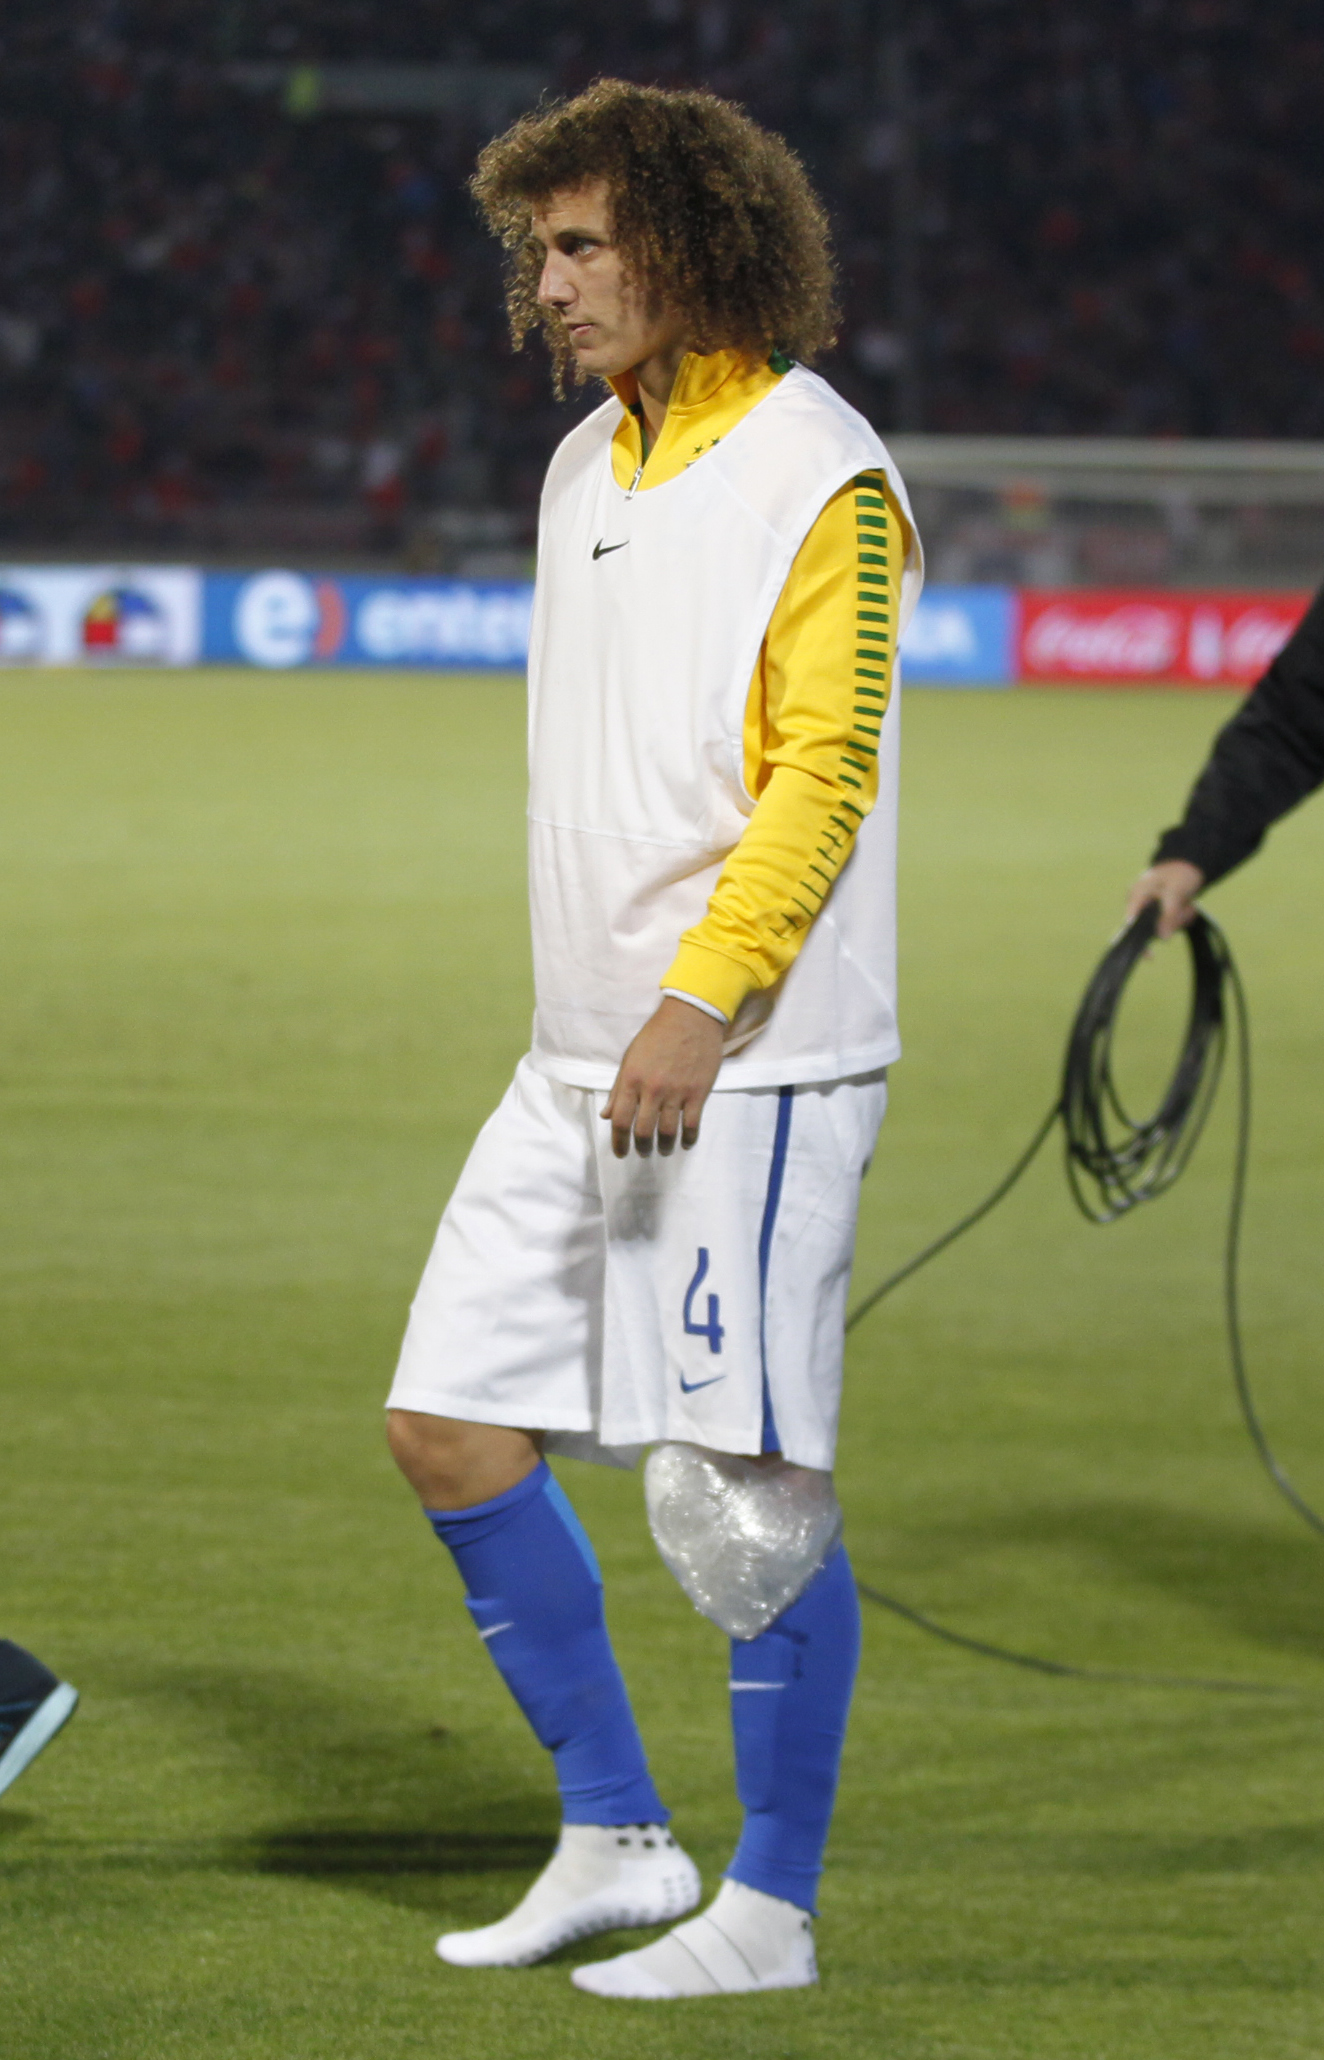 Brazil's David Luiz, leaves the field with an ice pack on his knee at the end of the first half, during a 2018 Russia World Cup qualifying soccer match against Chile in Santiago, Chile, Thursday, Oct. 8, 2015.(AP Photo/Martin Mejia)